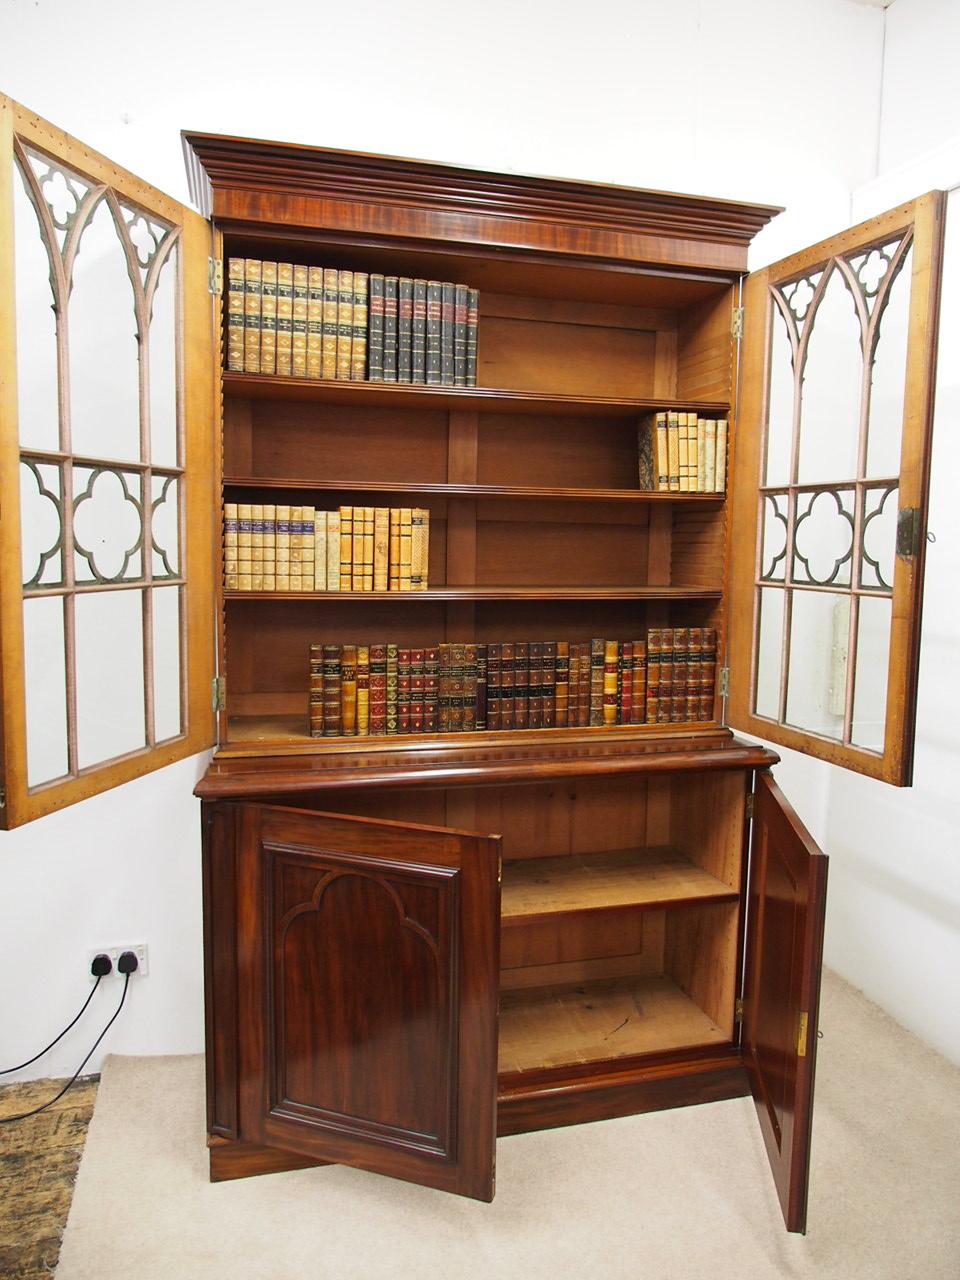 Gothic style cabinet bookcase in figured mahogany, circa 1840. The upper section has elaborate Gothic style astragal bars and carvings surmounted by a simple classic cornice, Gothic style pilasters at the sides and rounded moldings to the frieze. It